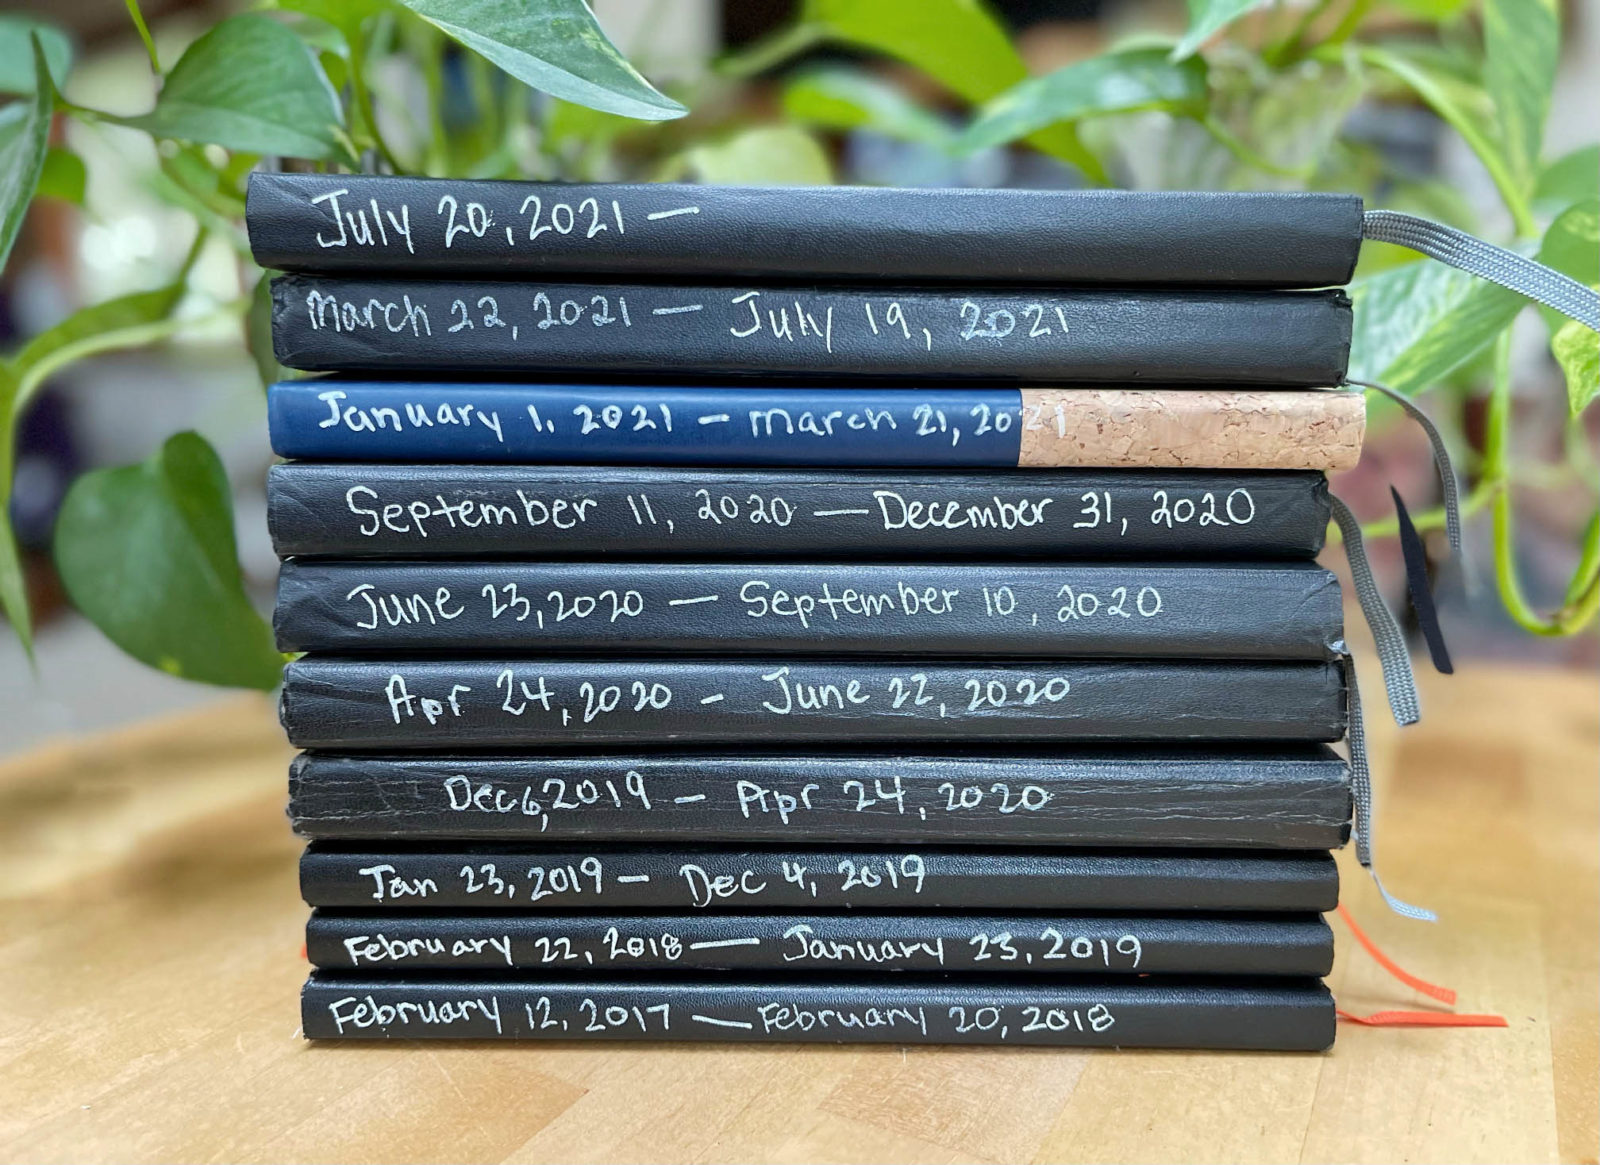 Stack of journals with spines showing dates